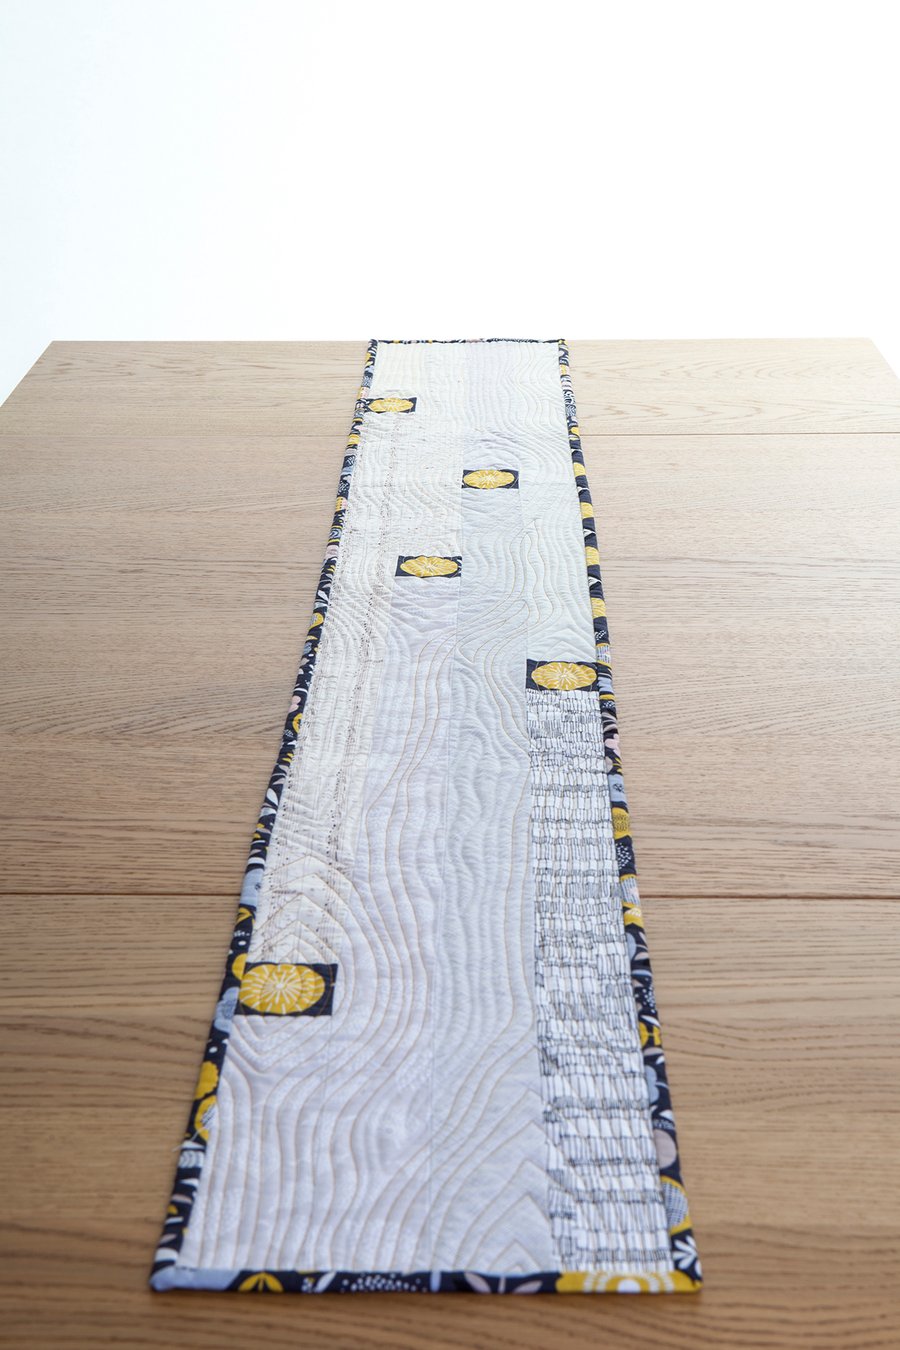 Patchwork Table Runner in Neutral Shades with Wood Grain Quilting